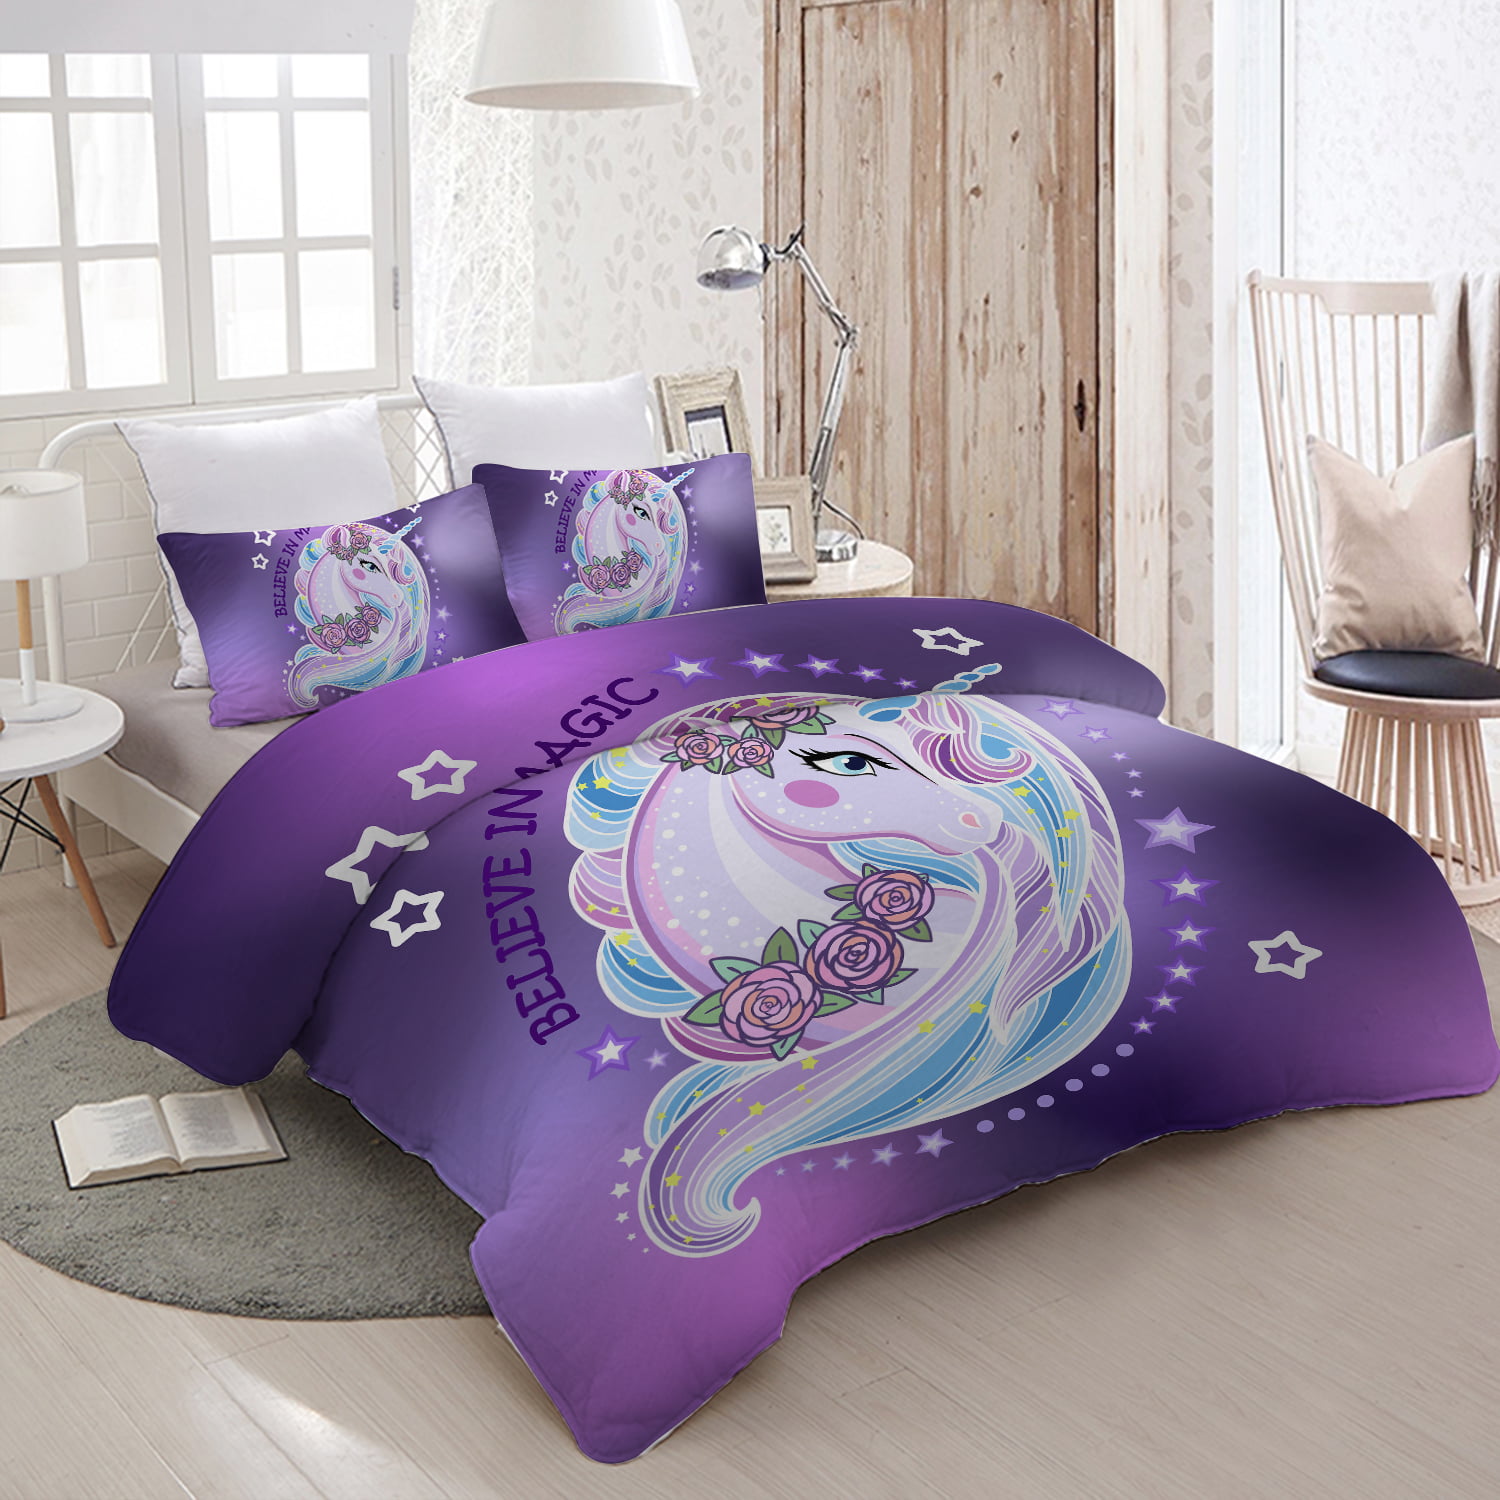 Printed Comforter Set with Two Pillow Case Soft Brushed Microfiber Bedding Set 